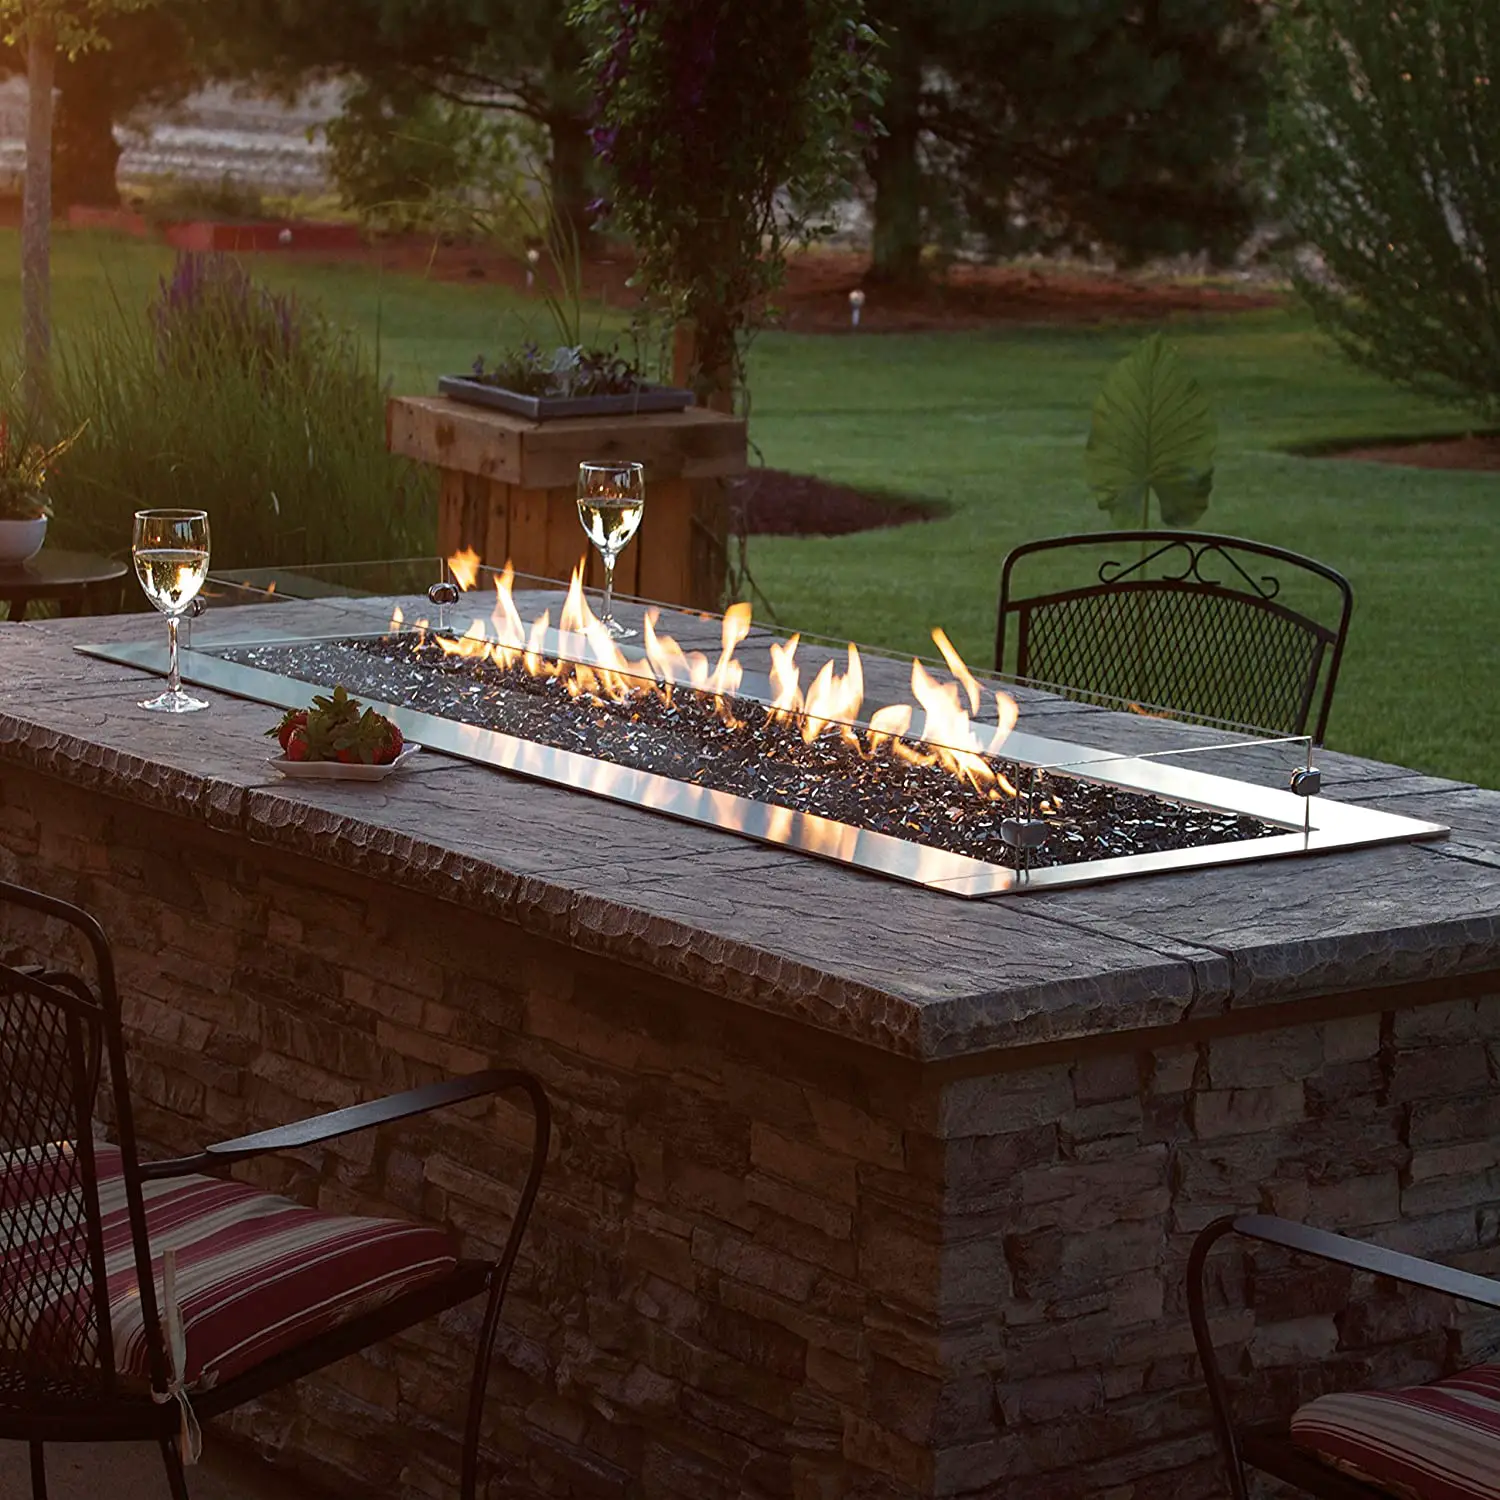 Outdoor Propane Gas Fire Pit Kits Uk Fire gas outdoor pit propane square peaktop pits walmart patio garden